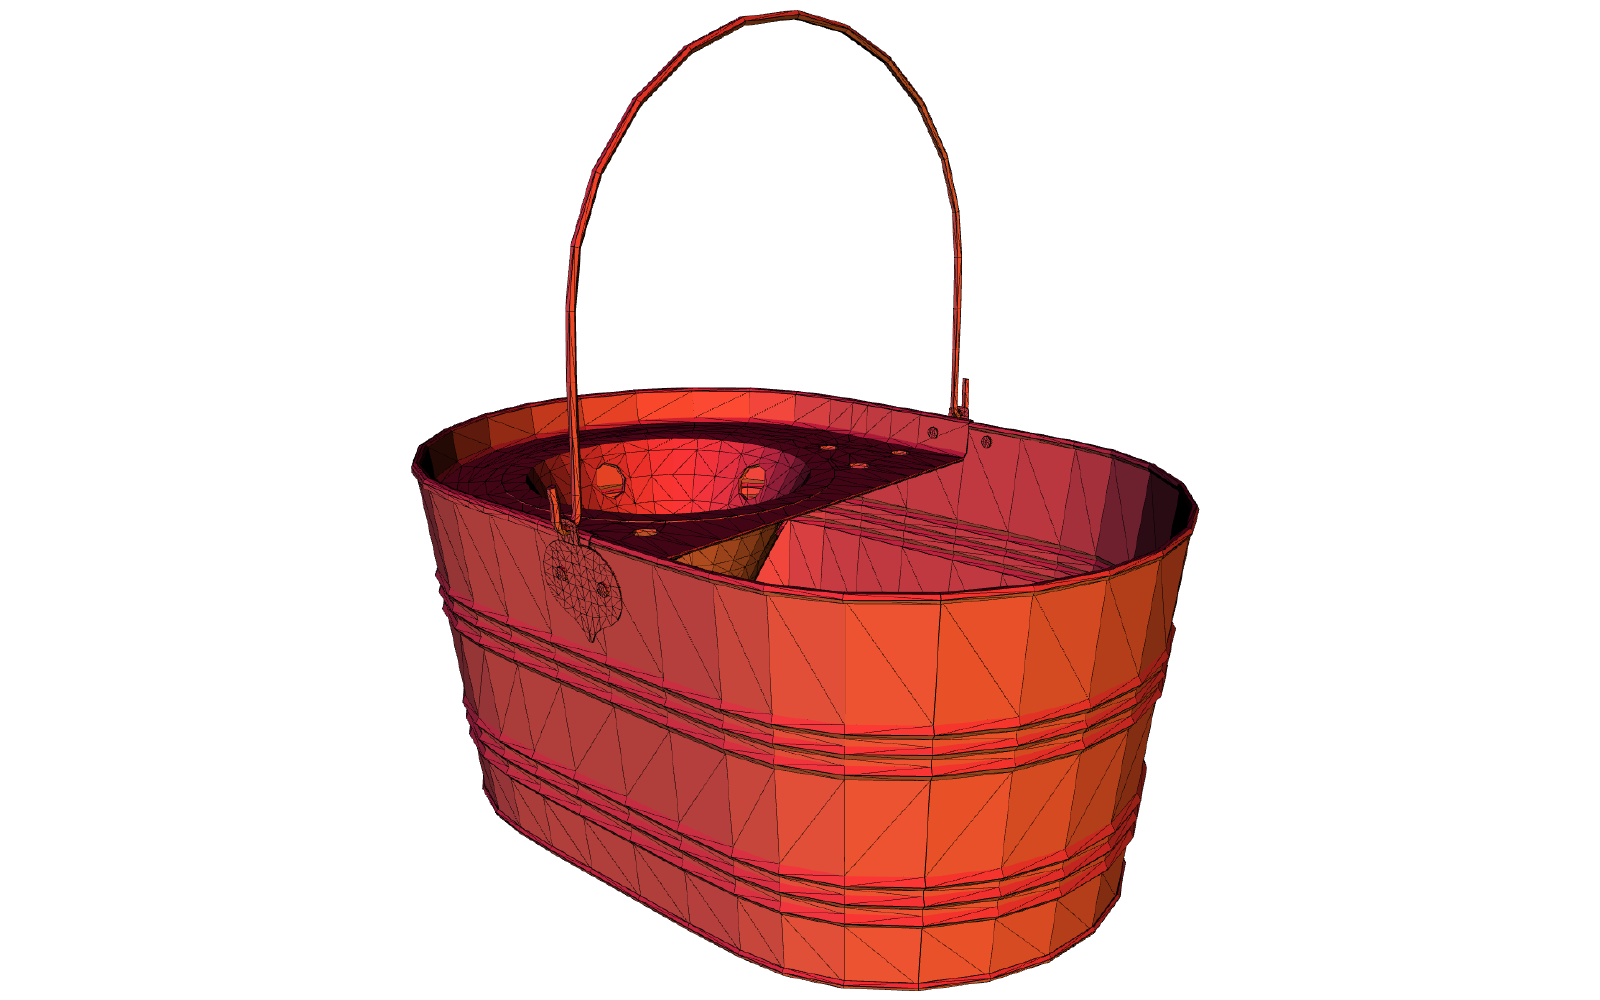 3D Model of a Mop Bucket For Drawing Reference